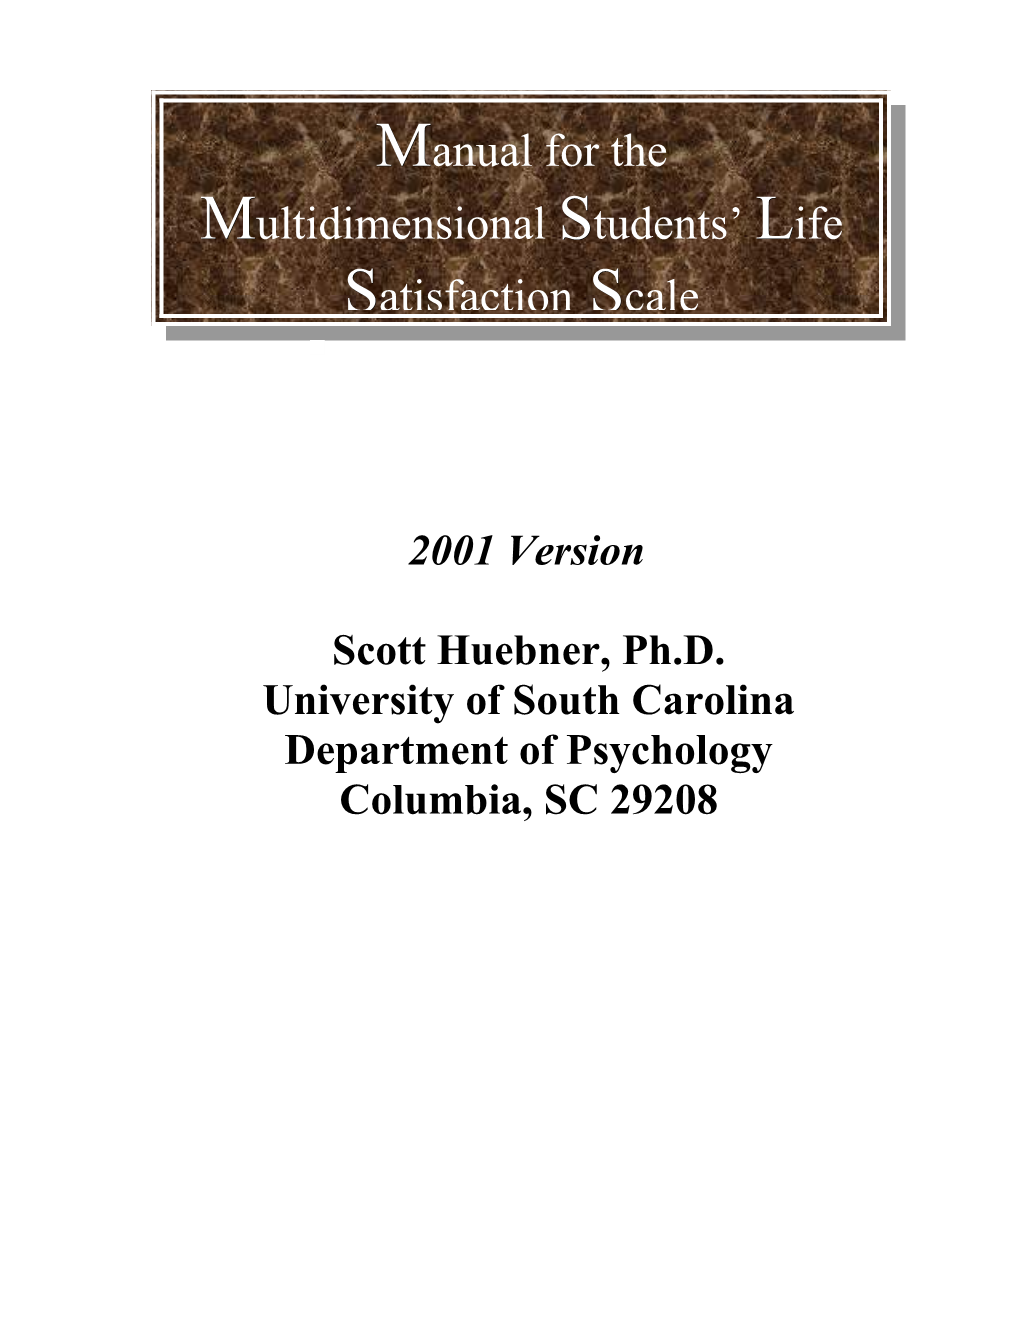 Multidimensional Students Life Satisfaction Scale: Introduction and Rationale